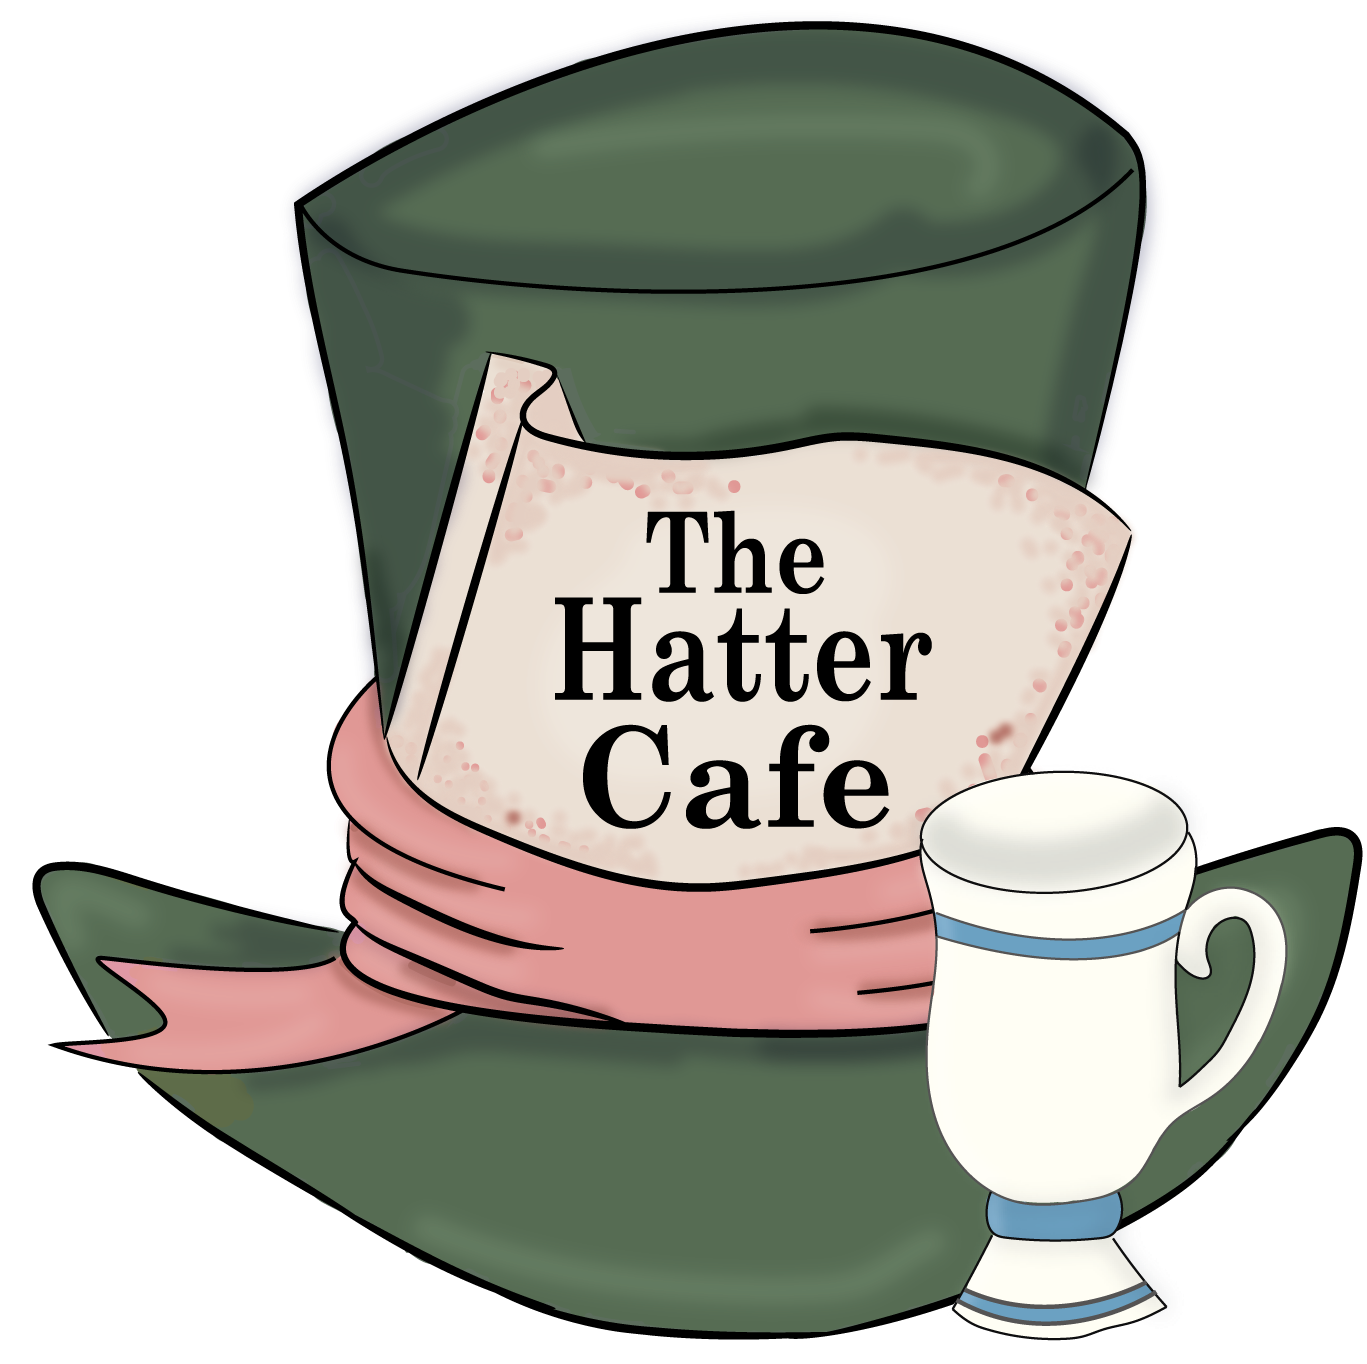 The Hatter Cafe